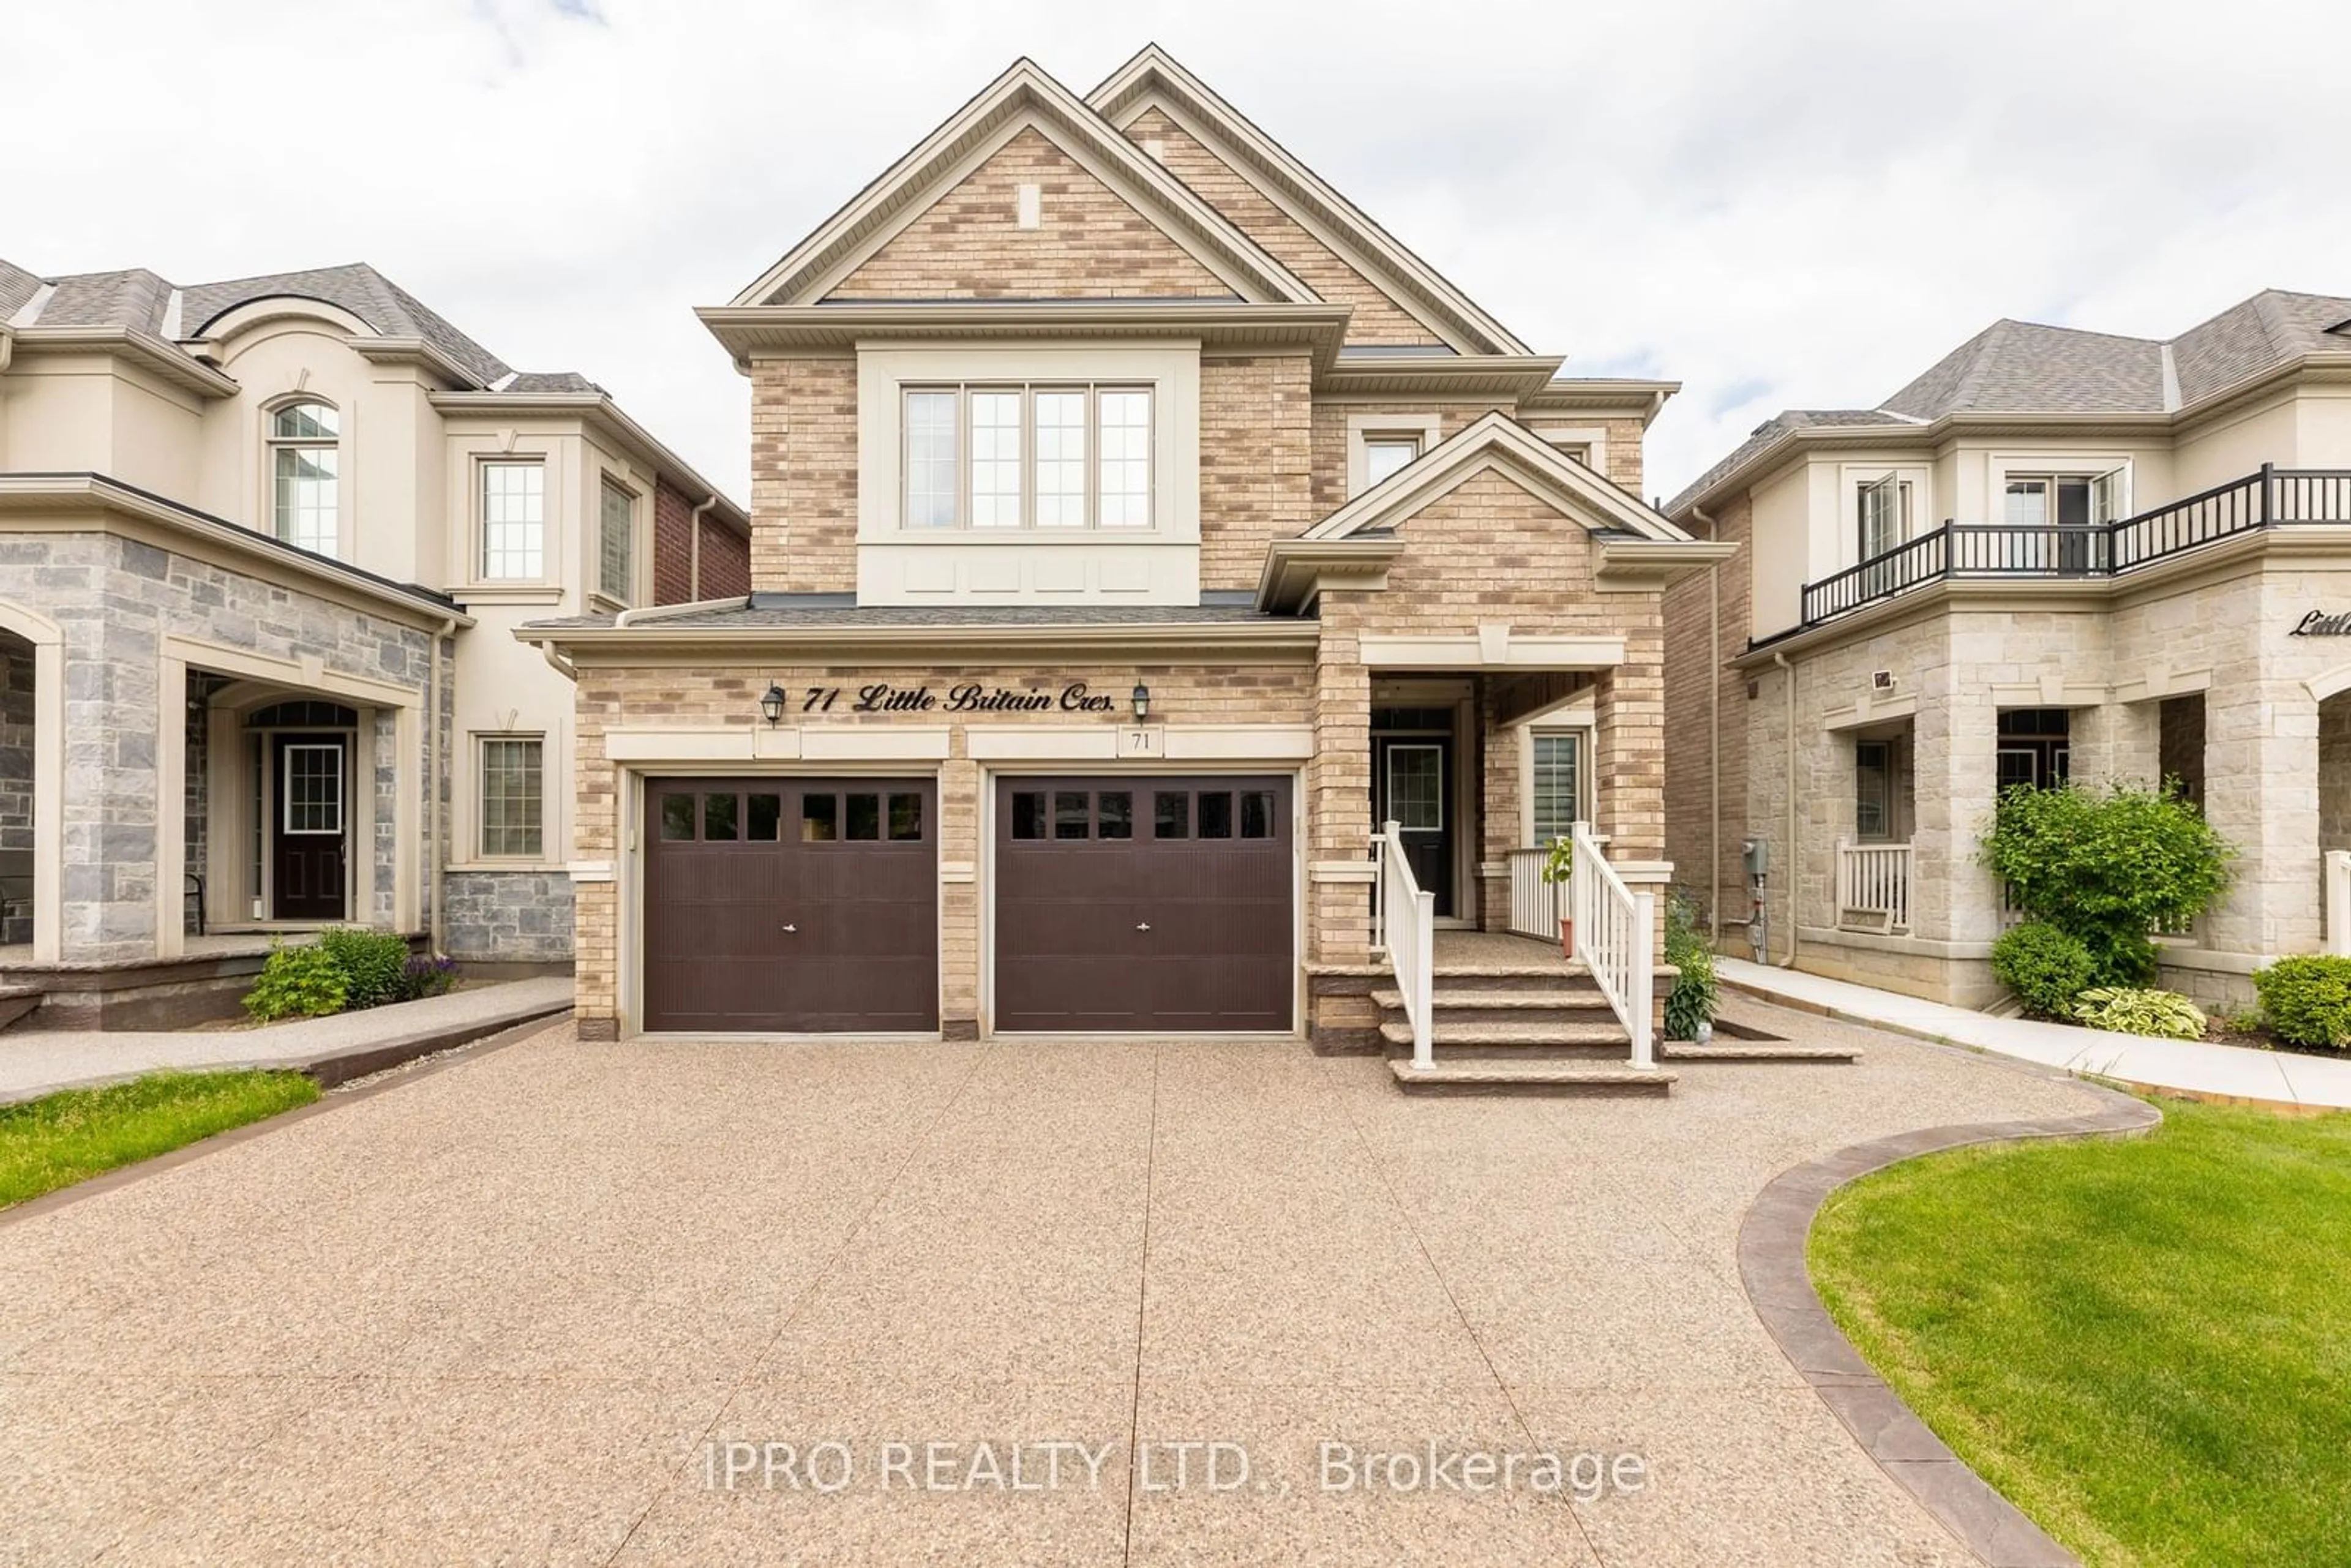 Home with brick exterior material for 71 Little Britain Cres, Brampton Ontario L6Y 6A8